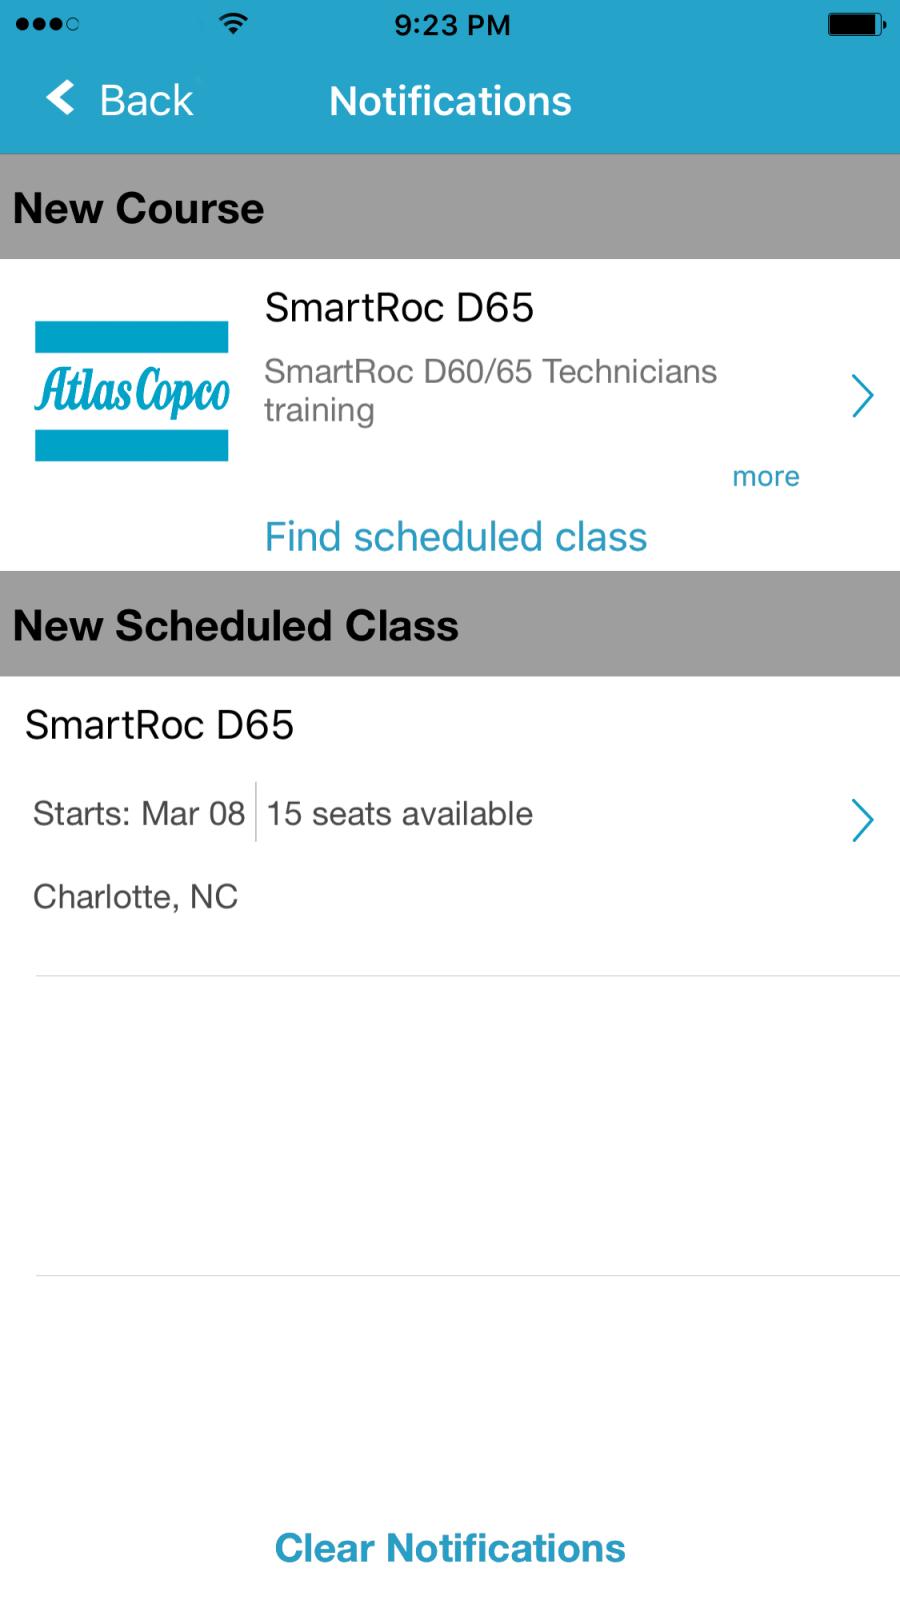 Distributors of Atlas Copco equipment and operators themselves can browse and request training courses and class sessions on Atlas Copco’s free mobile app, Training365, available from the Apple or Google Play stores.